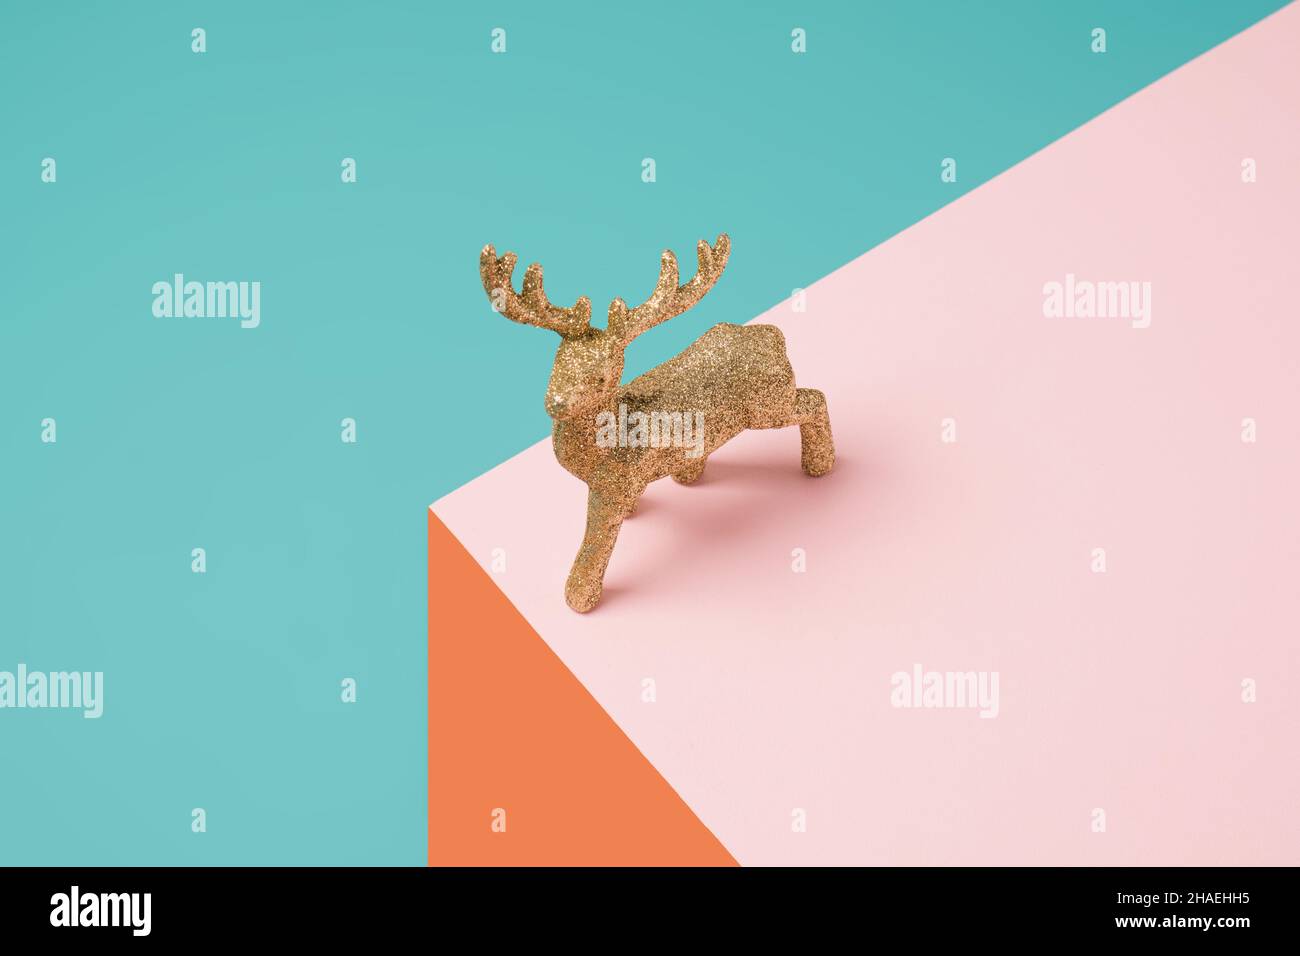 Christmas tree reindeer ornament on a geometric colorful background. Minimal winter holiday concept Stock Photo